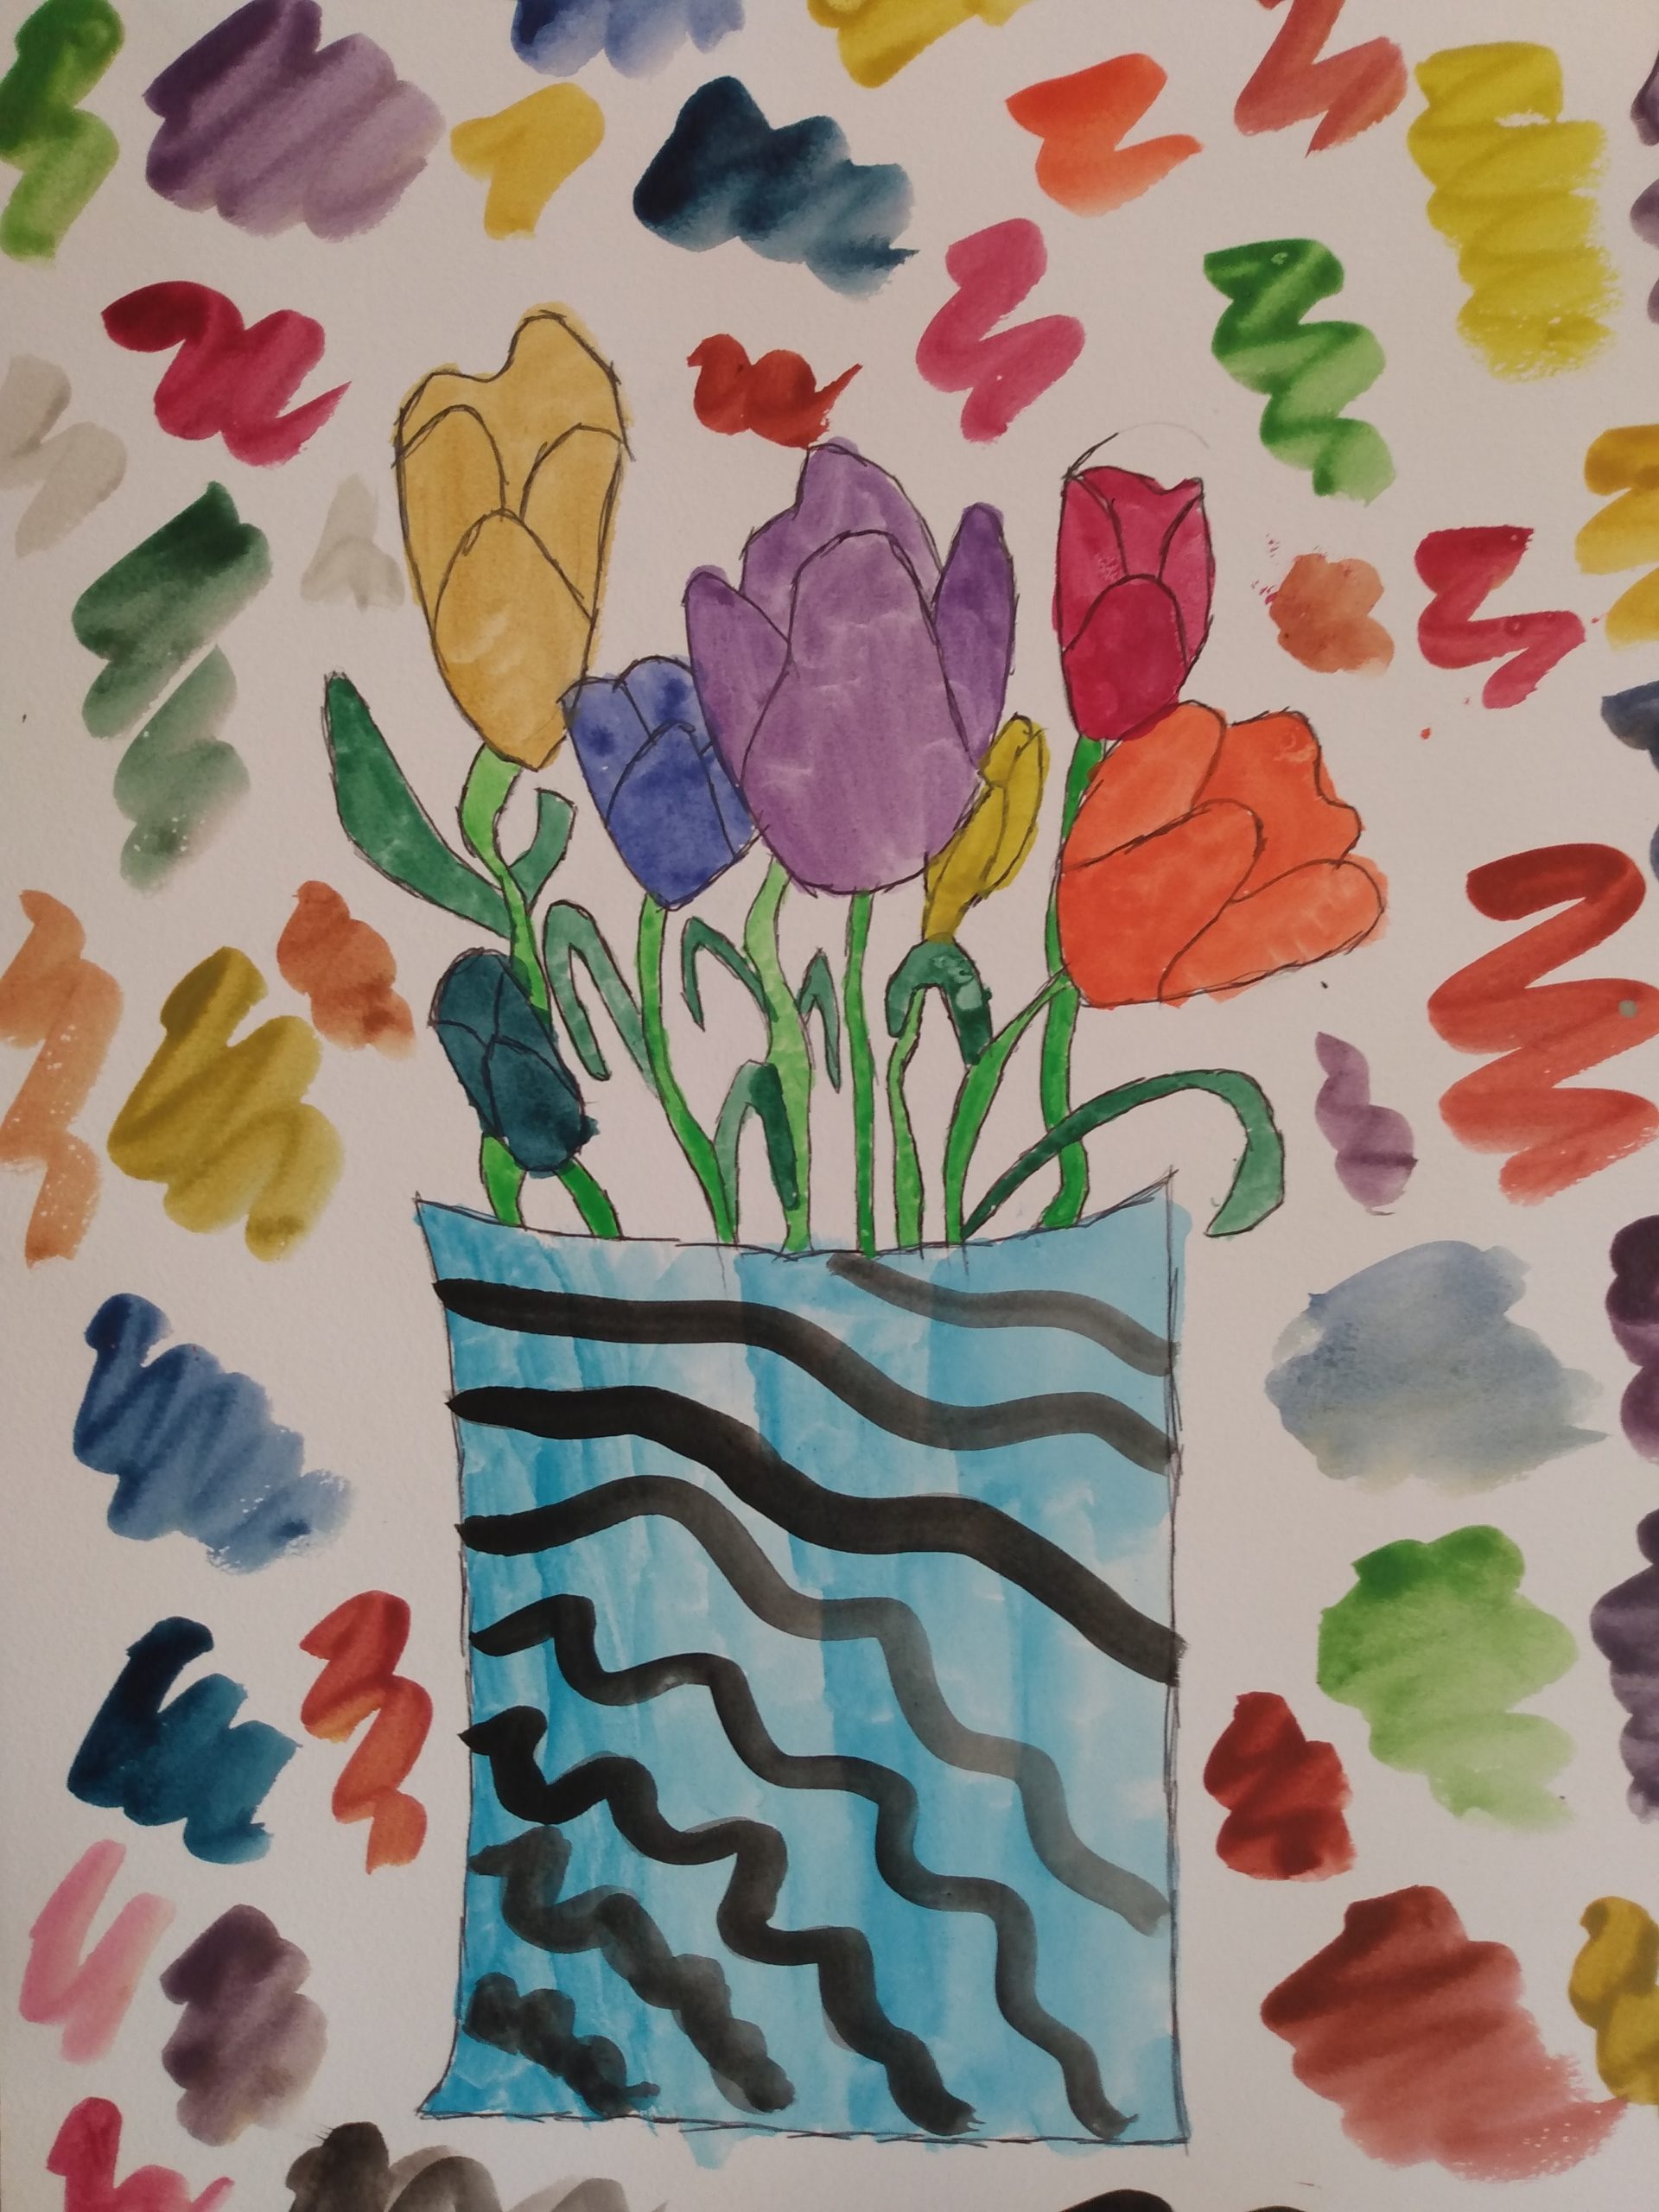 A drawing of 7 flowers in a square vase. The flowers (from left to right) are coloured turquoise, dark yellow, dark blue, purple, light yellow, burgundy and orange. They each have green stems which are sprouting from a blue vase with black stripes. The white background is populated by many felt-tip squiggles, each a different colour.